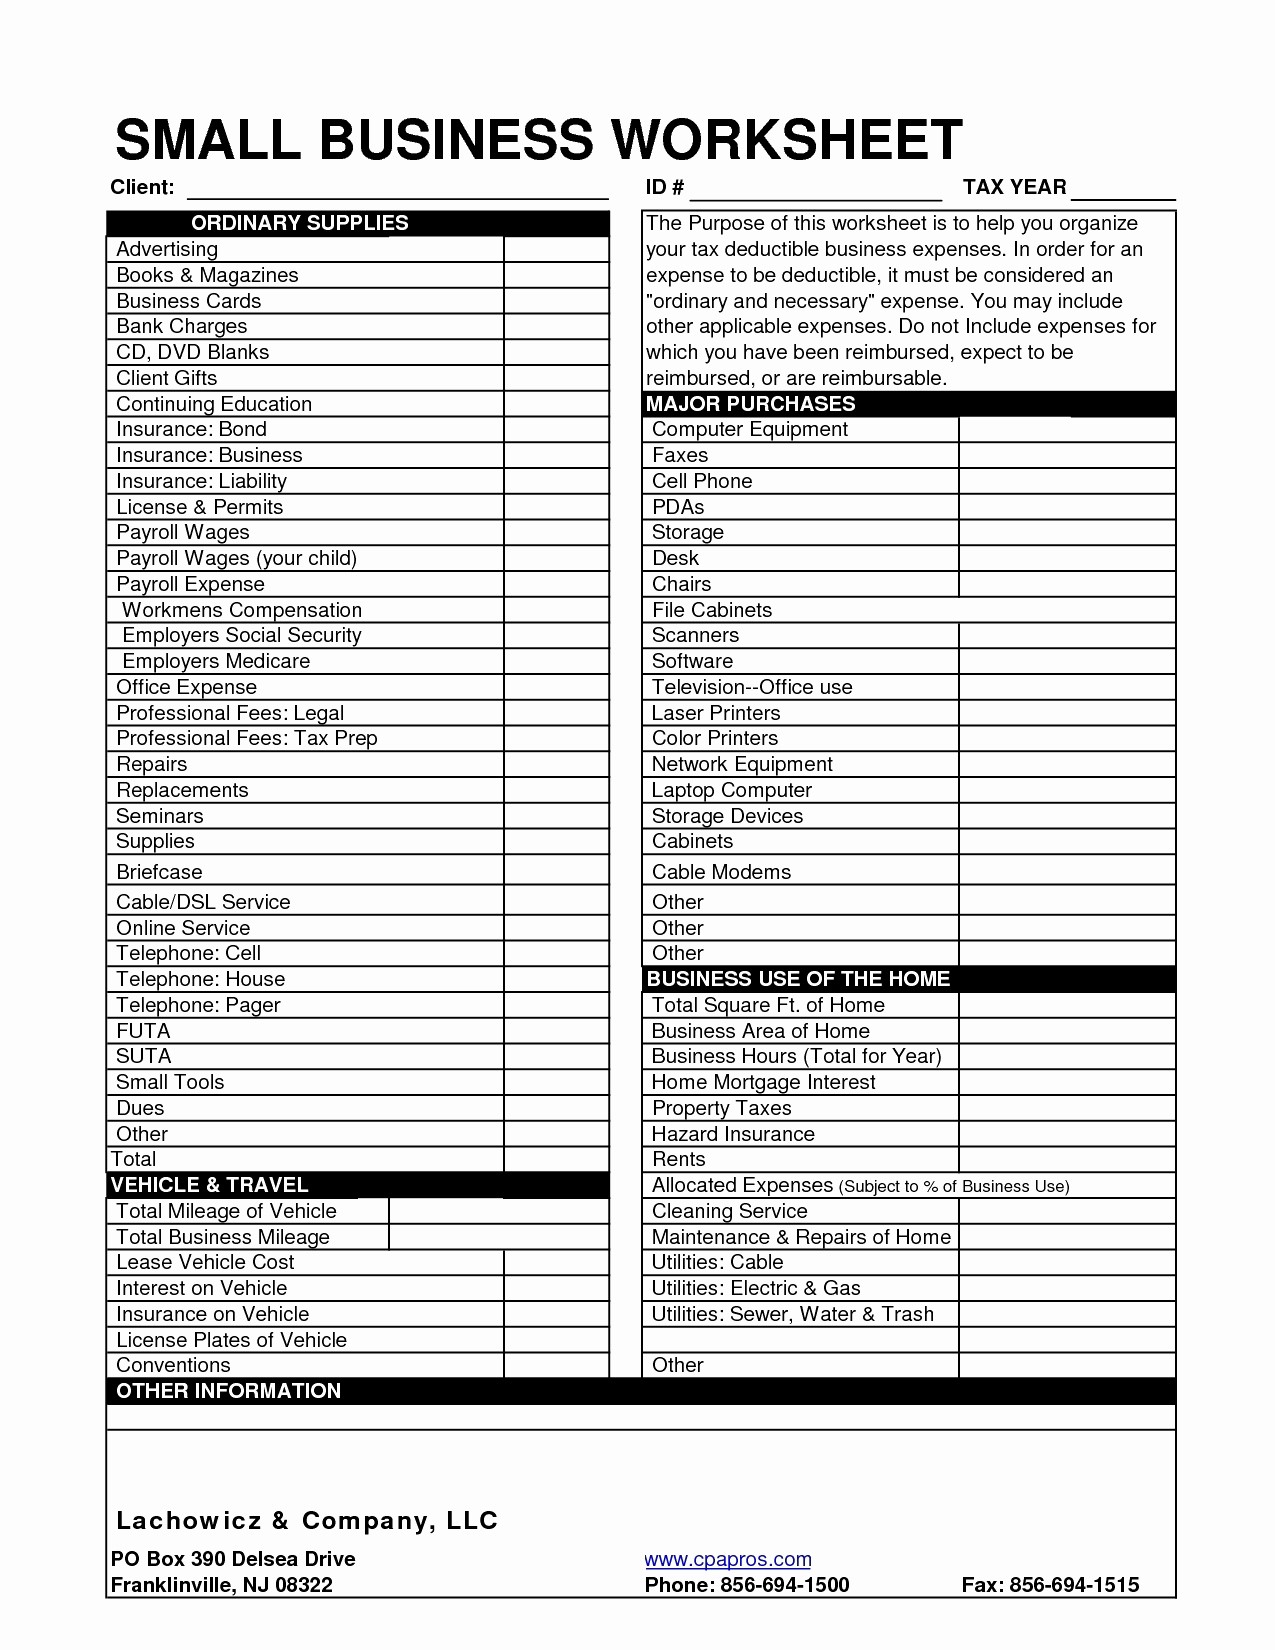 Small Business Itemized Deductions Worksheet Elegant Document For